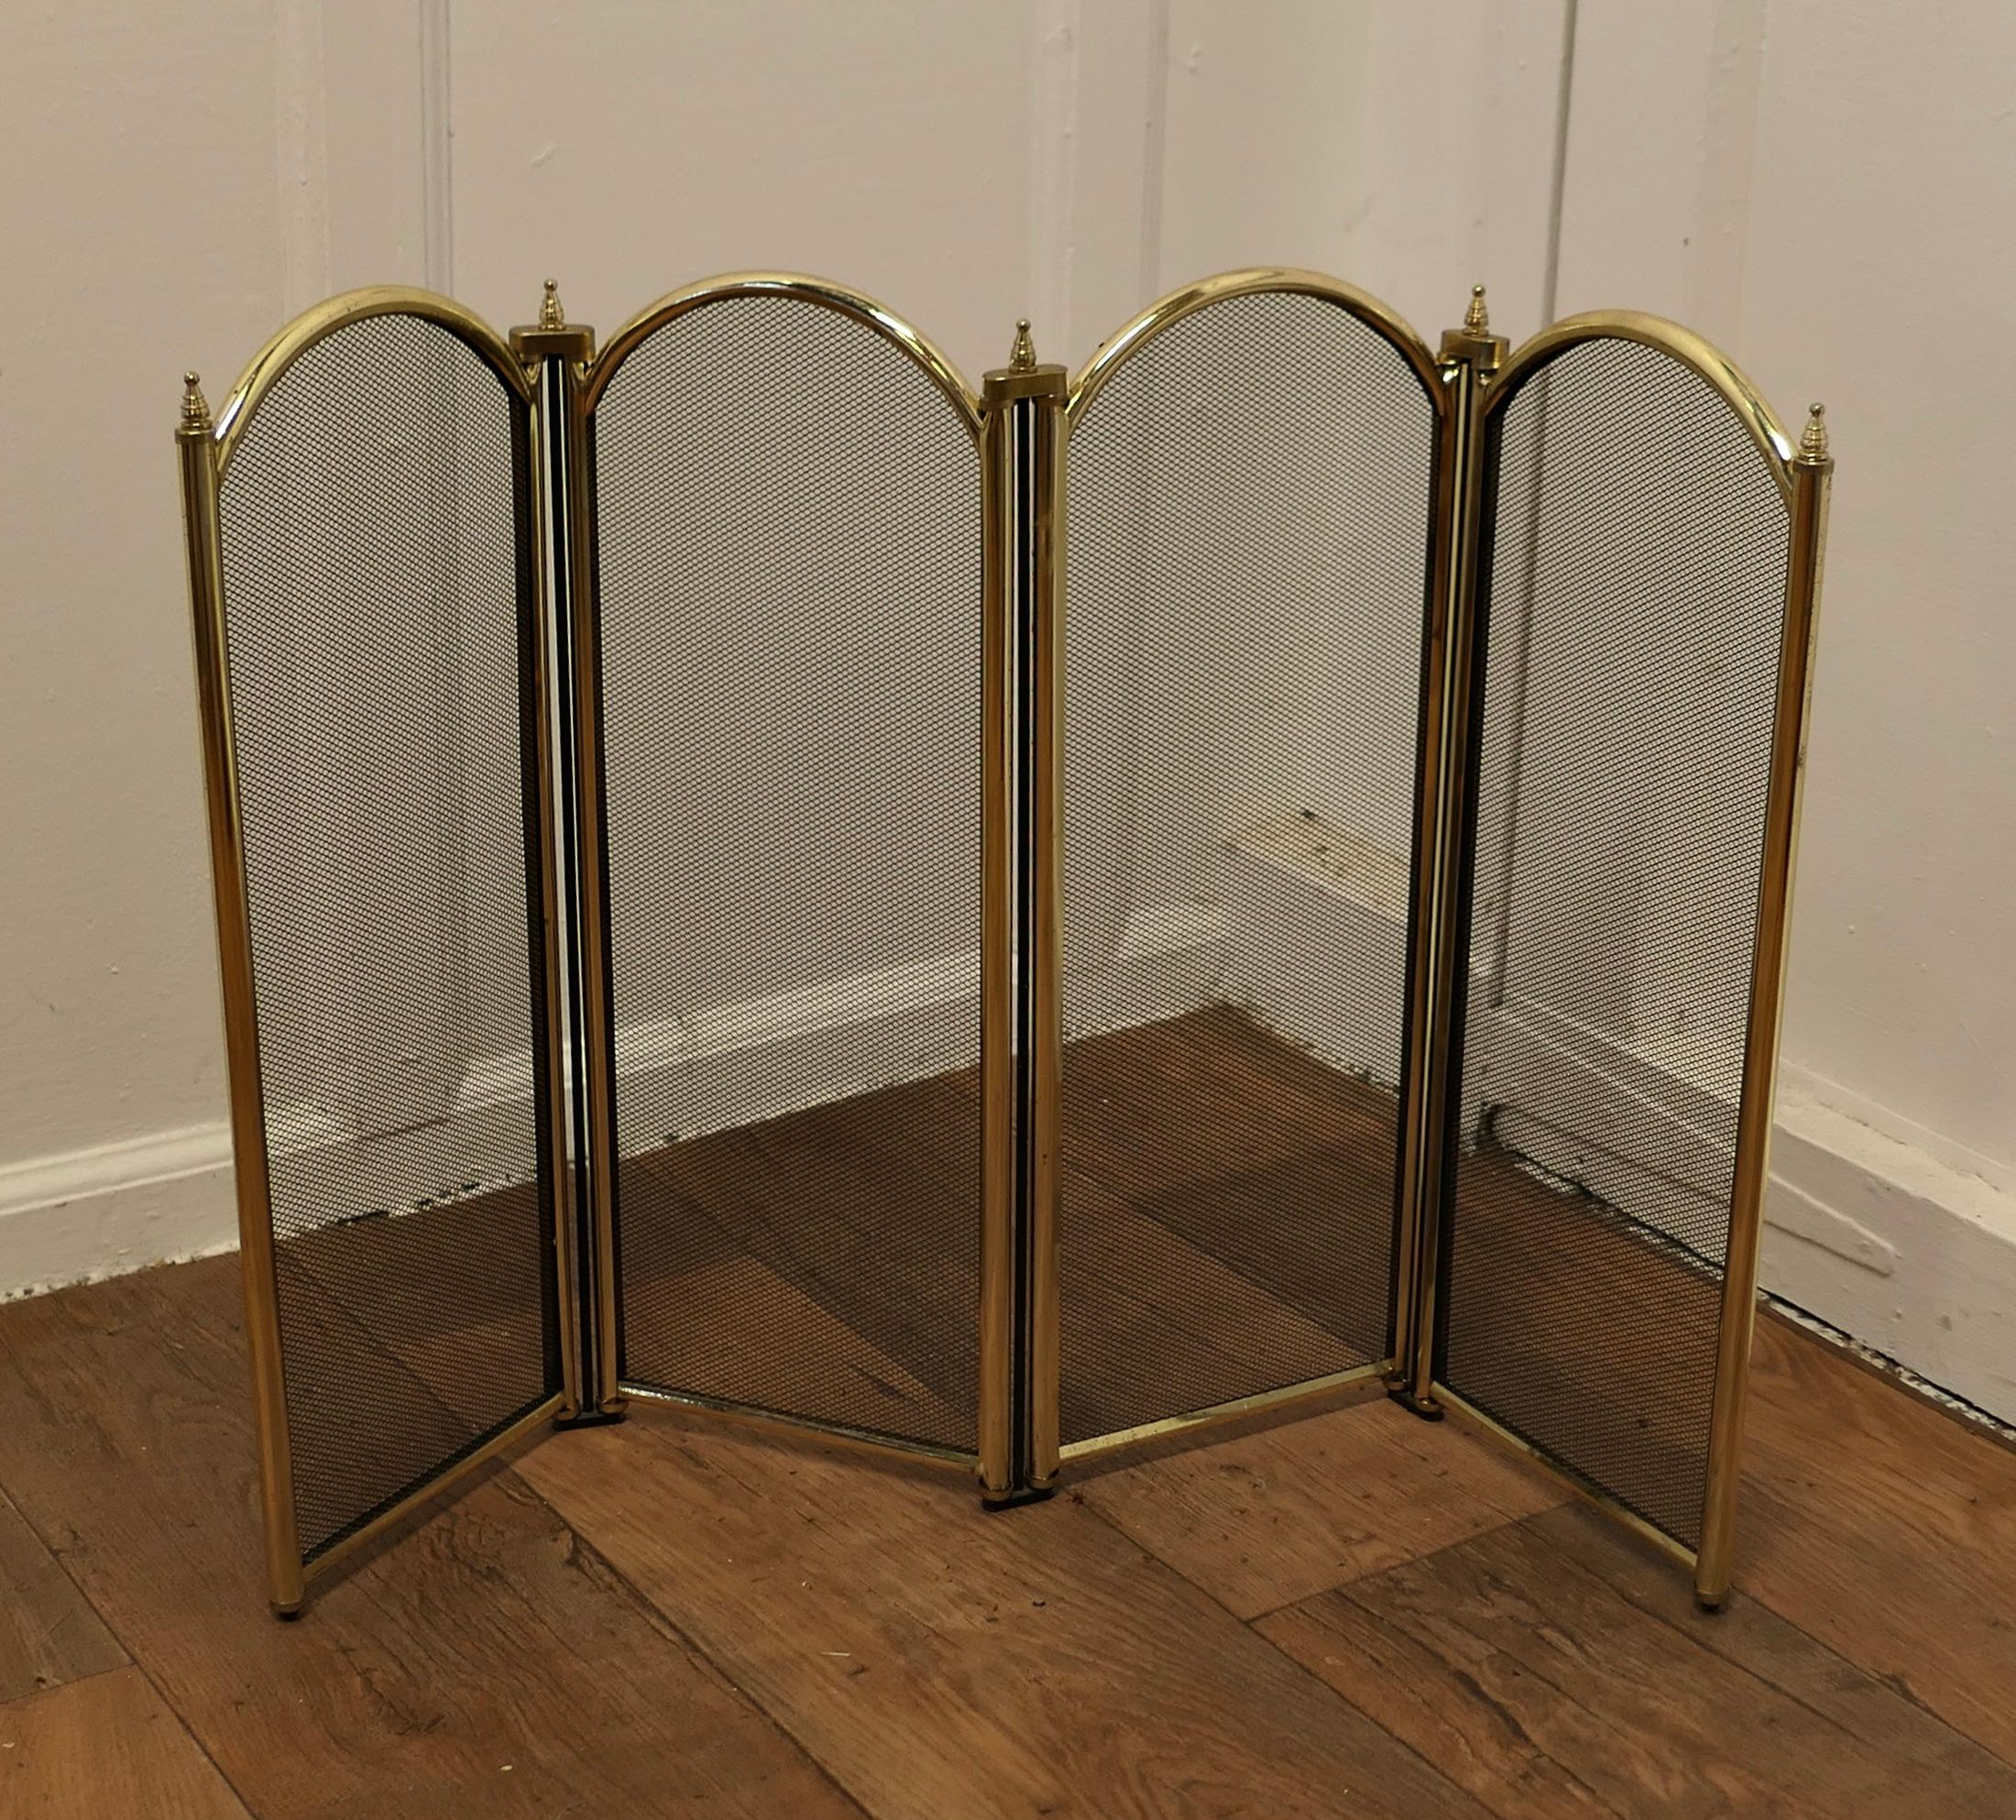  Folding Brass and Iron Fire Guard for Inglenook Fireplace

This very useful spark guard has a 4 fold brass frame and a fine black mesh infill decorated with brass finials along the top 
When opened out the screen can be shaped to enclose your fire,